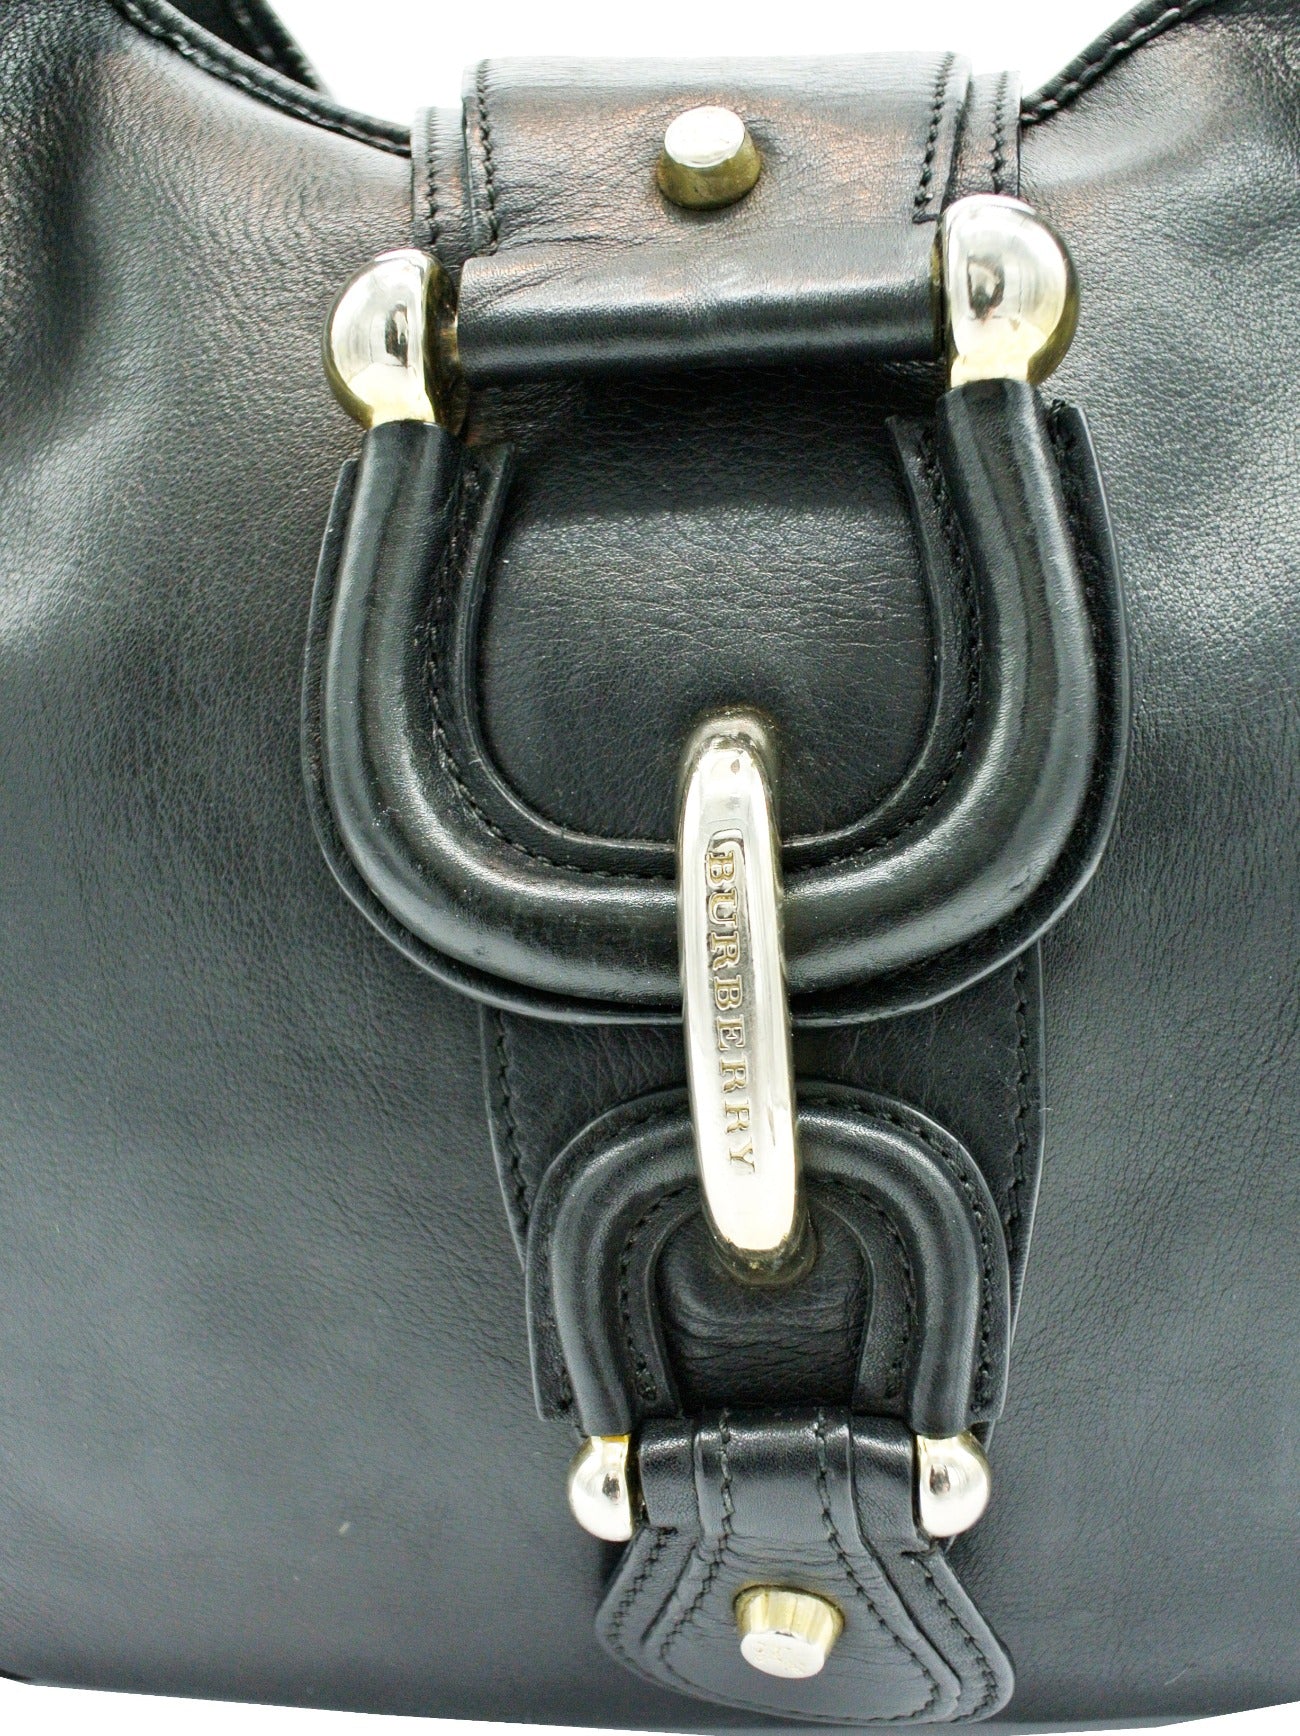 Burberry Buckle Bag Strap in Black